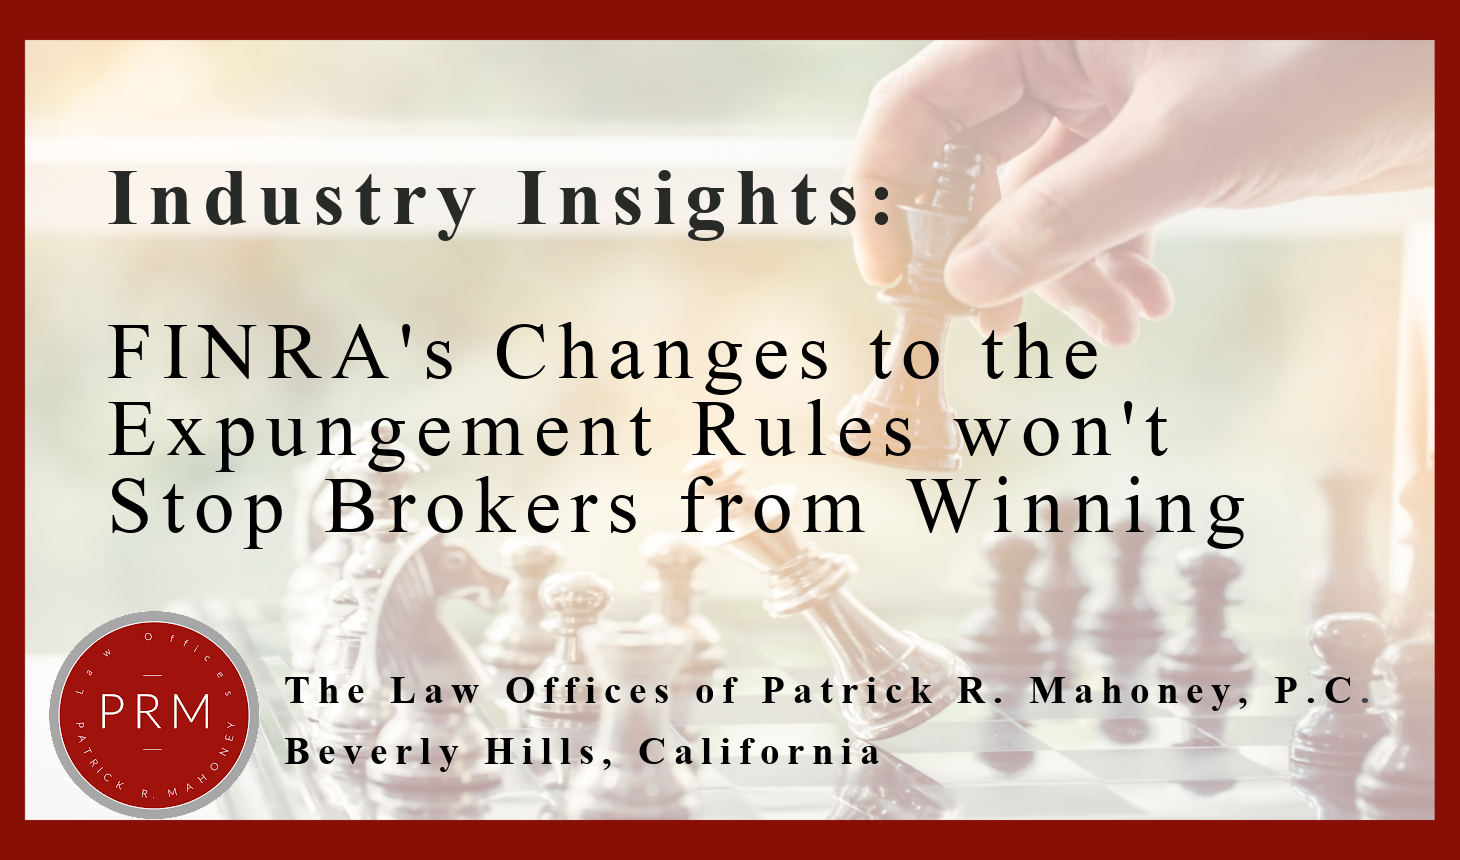 FINRA’s Changes to the Expungement Rules won’t Stop Brokers from Winning